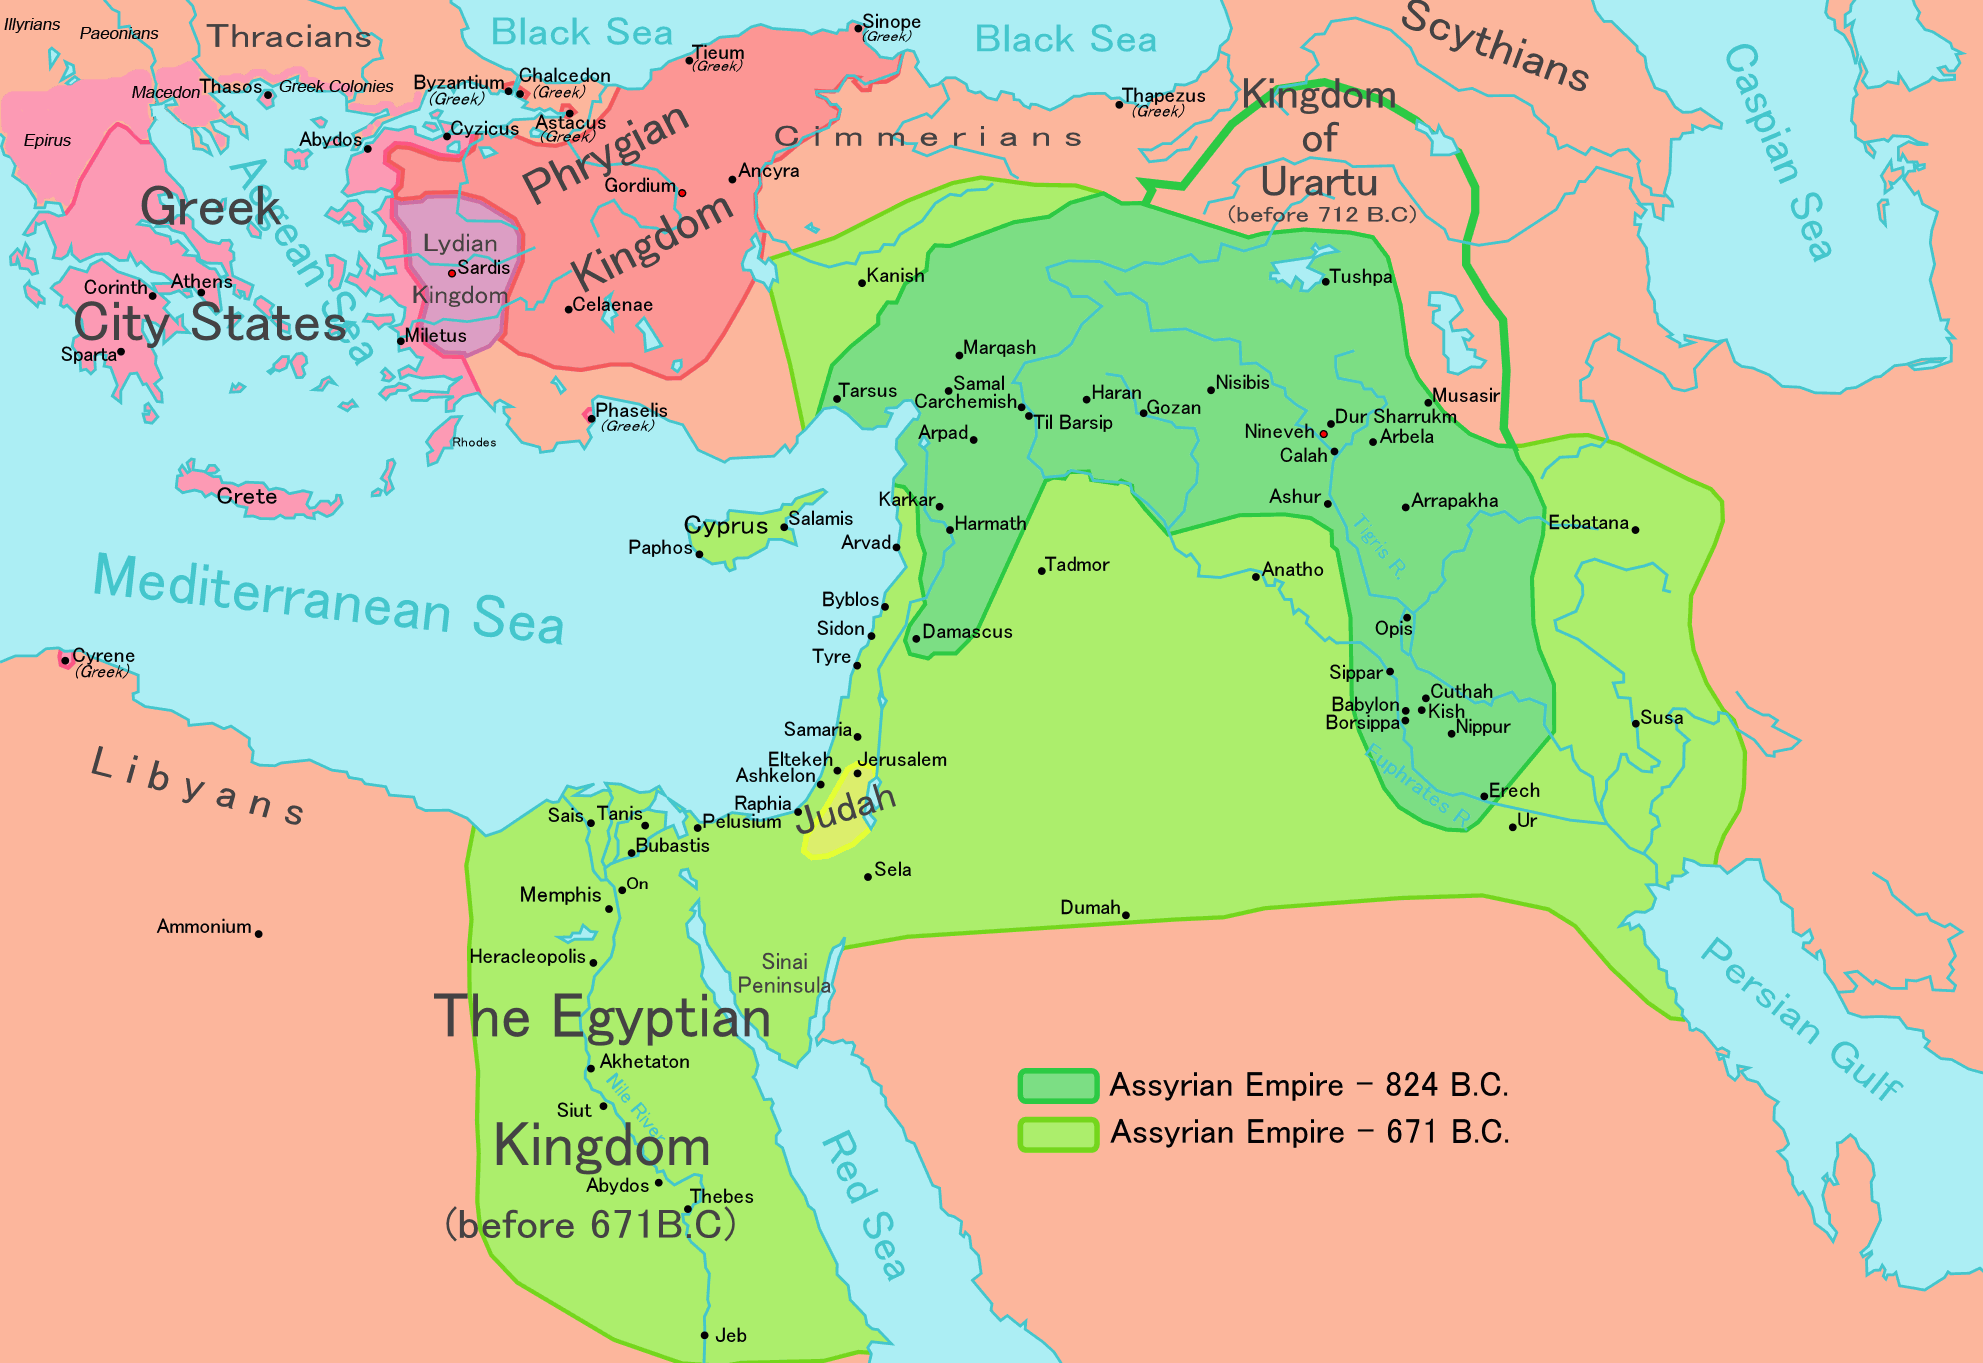 Map of Assyria